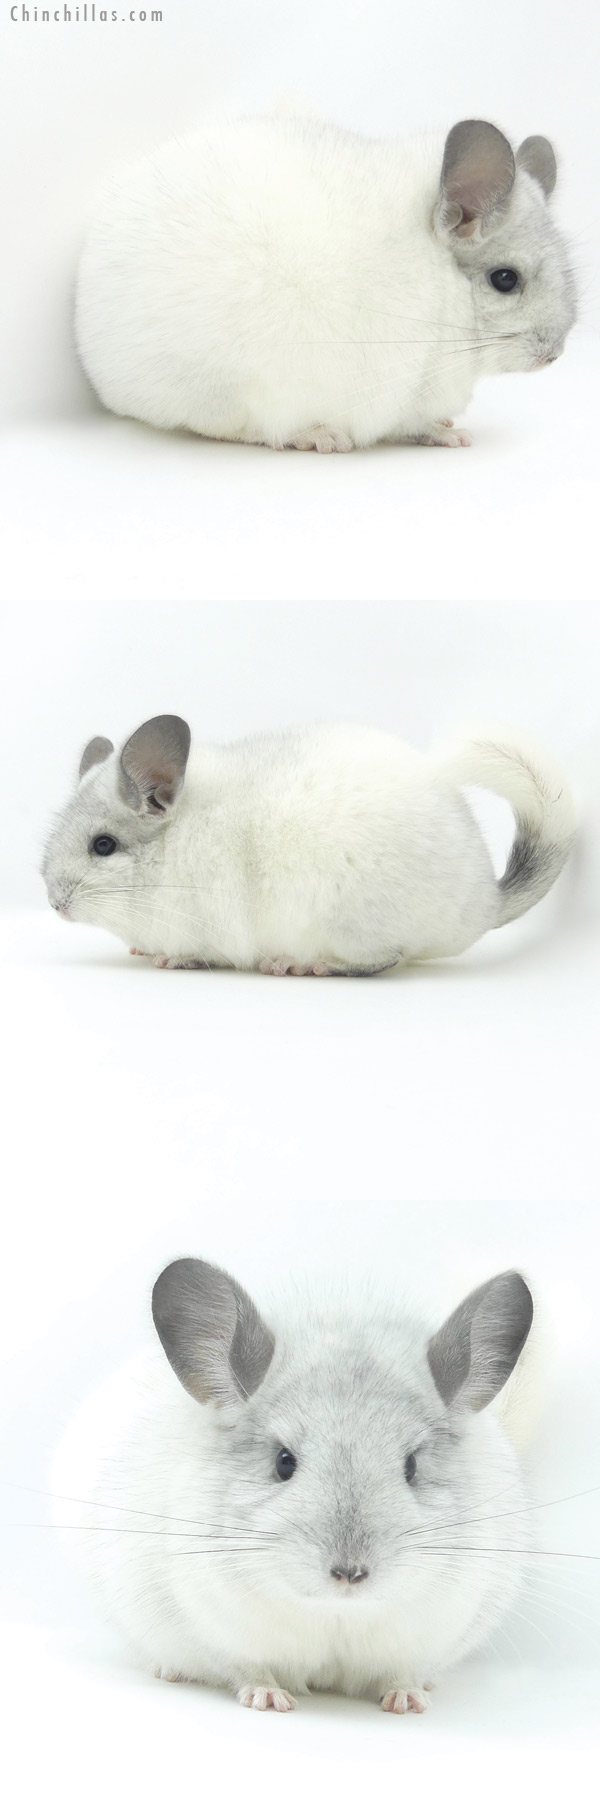 Chinchilla or related item offered for sale or export on Chinchillas.com - 20021 Premium Production Quality White Mosaic Female Chinchilla